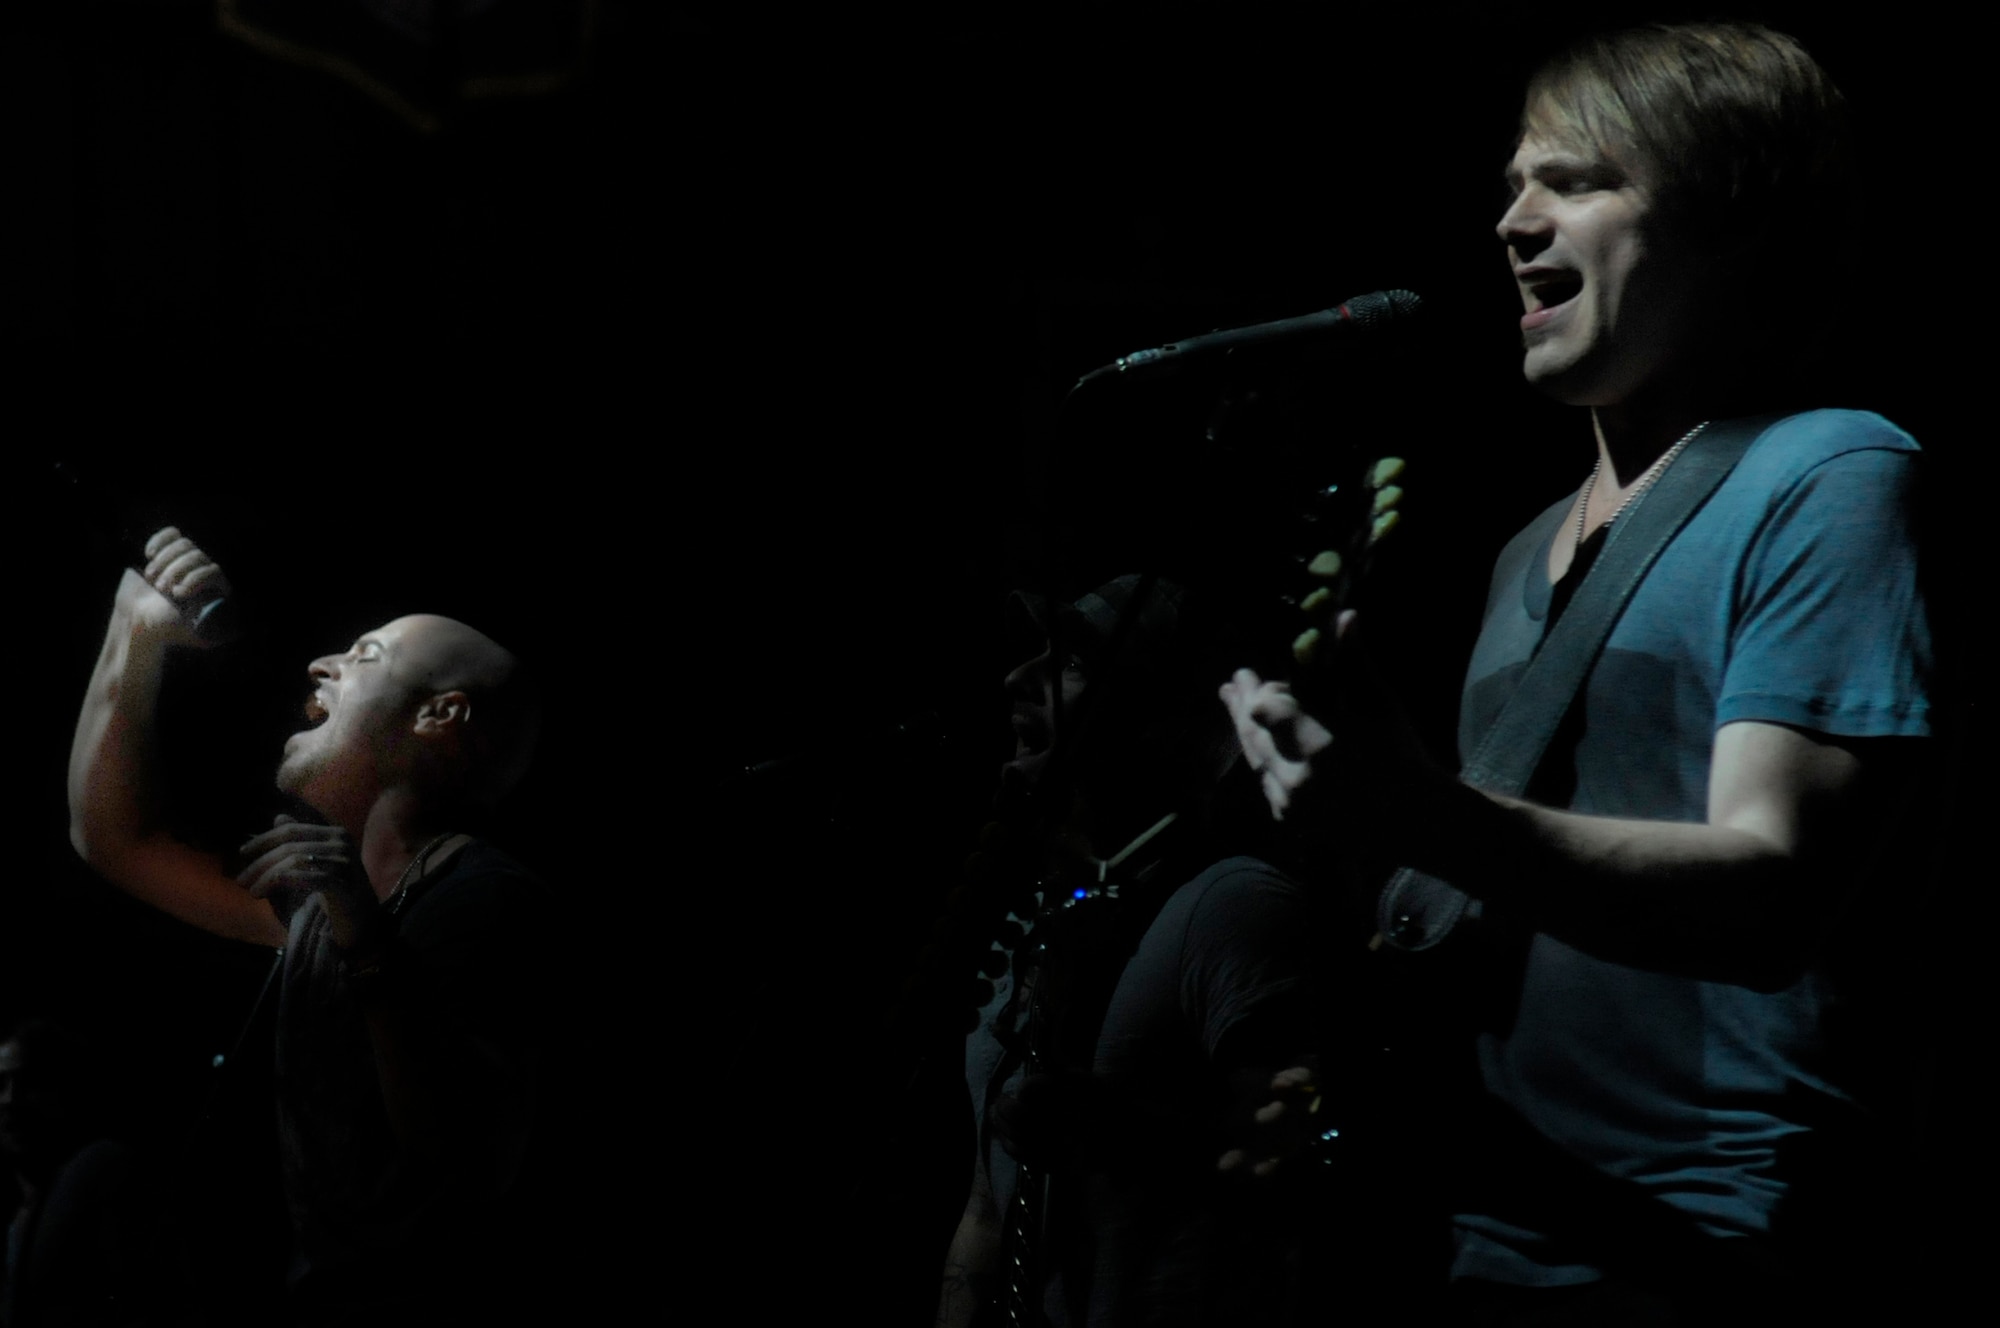 Chris Daughtry belts out lyrics to "Feels Like Tonight" with guitarist Brian Craddock during a concert in Hangar 1 at Ramstein Air Base, Germany, Dec. 10, 2011. The rock band Daughtry, comedian Gabriel "Fluffy" Iglesias and the Band of the U.S. Air Force Reserve performed during a concert for more than 4,000 service members. The performers finished out their 13-day tour at Ramstein. Their six concerts took them through Southwest Asia and Europe to bring entertainment to American troops and their families as part of the Operation Seasons Greetings - Tour for the Troops 2011. (U.S. Air Force photo by Staff Sgt. Travis Edwards)